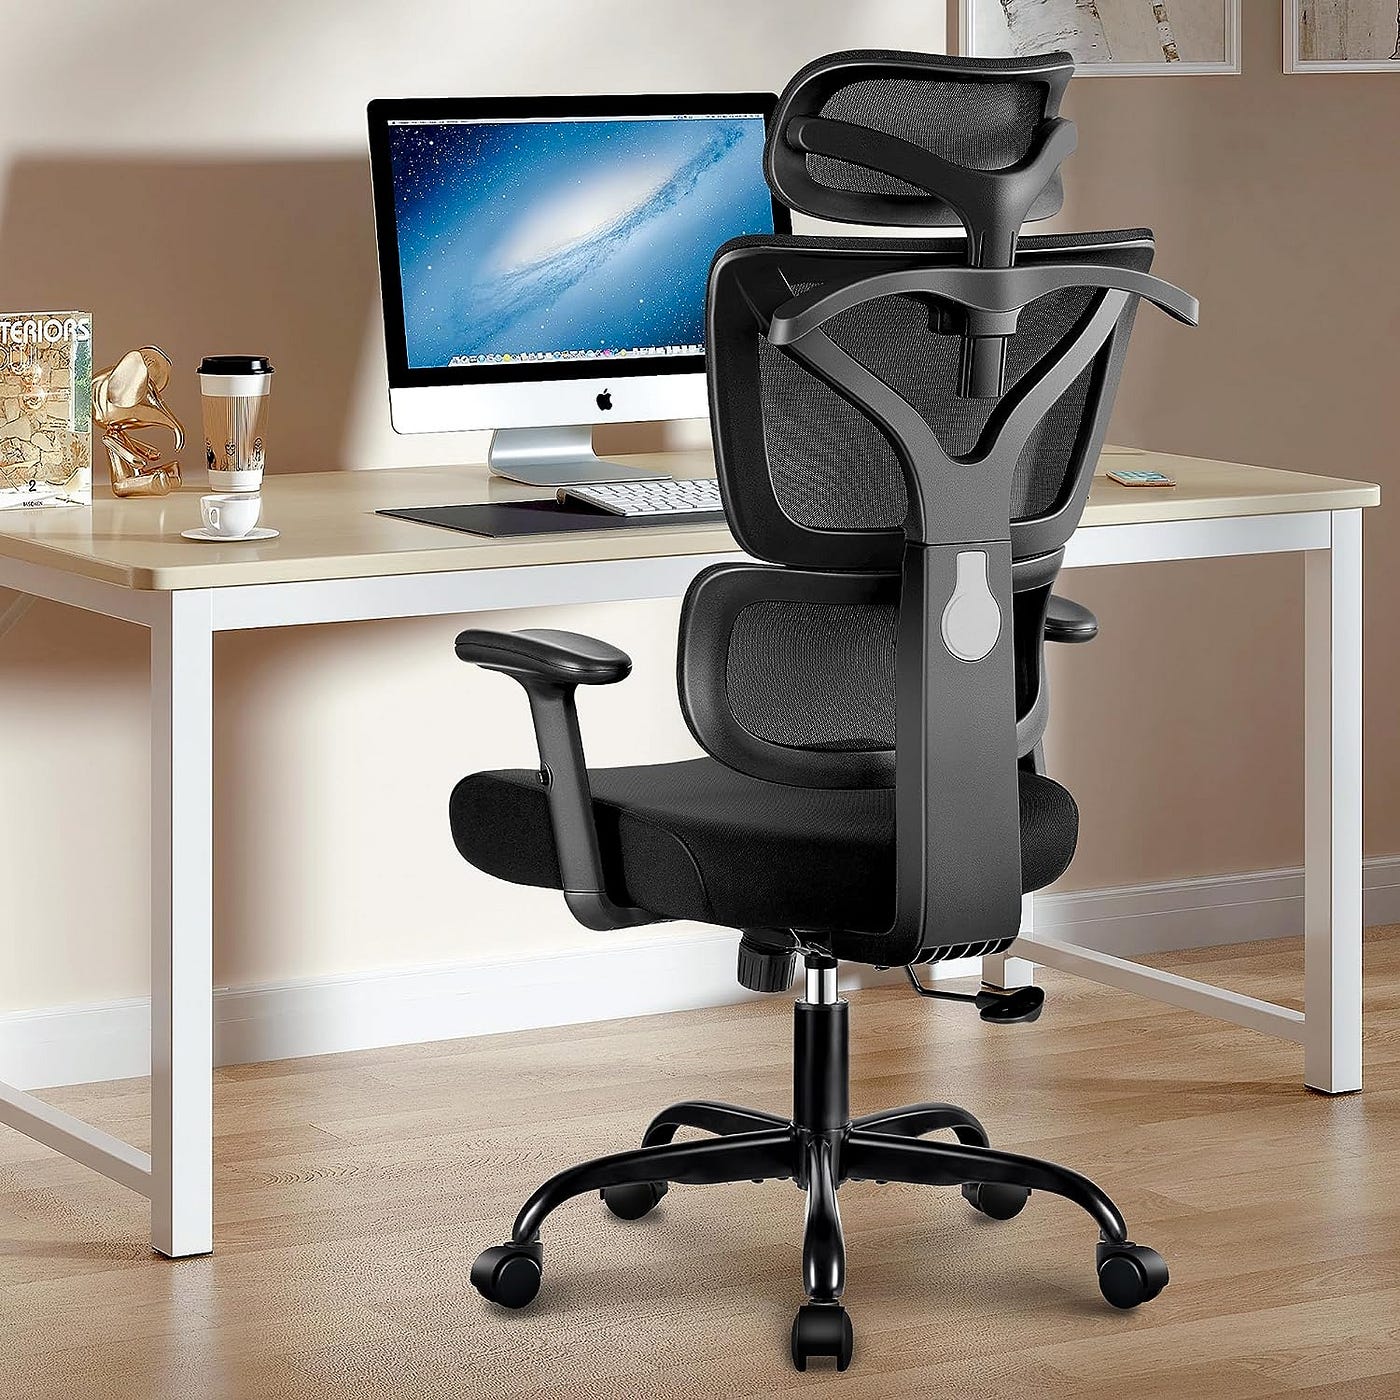 Winrise Office Chair: Comfort and Versatility for the Modern Home Office